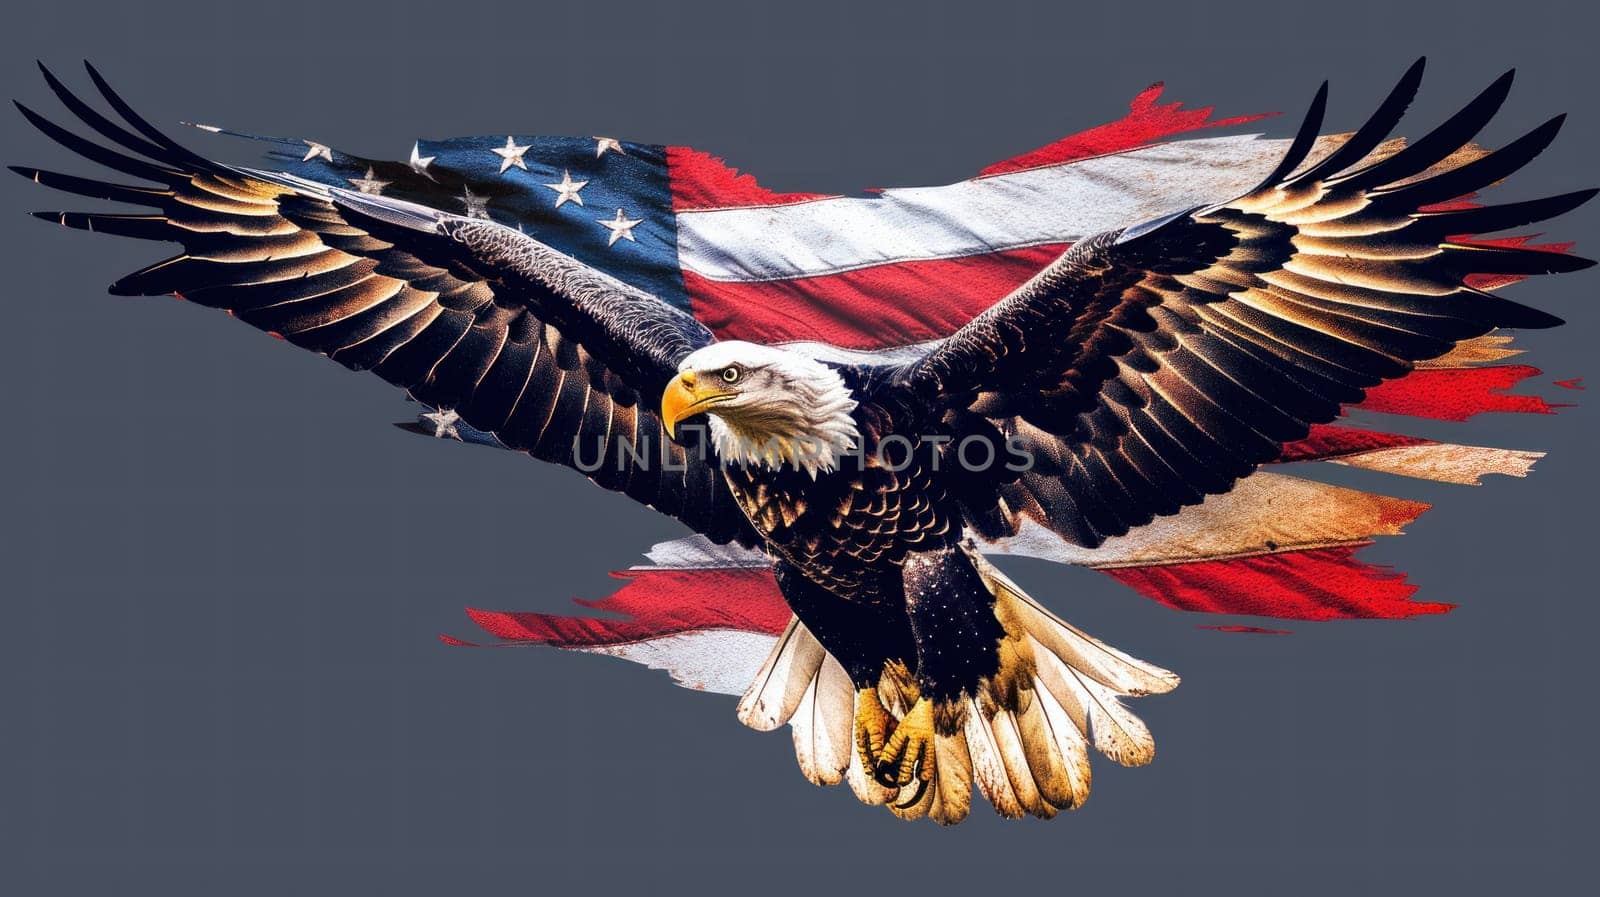 A large eagle is flying over a red, white, and blue American flag.